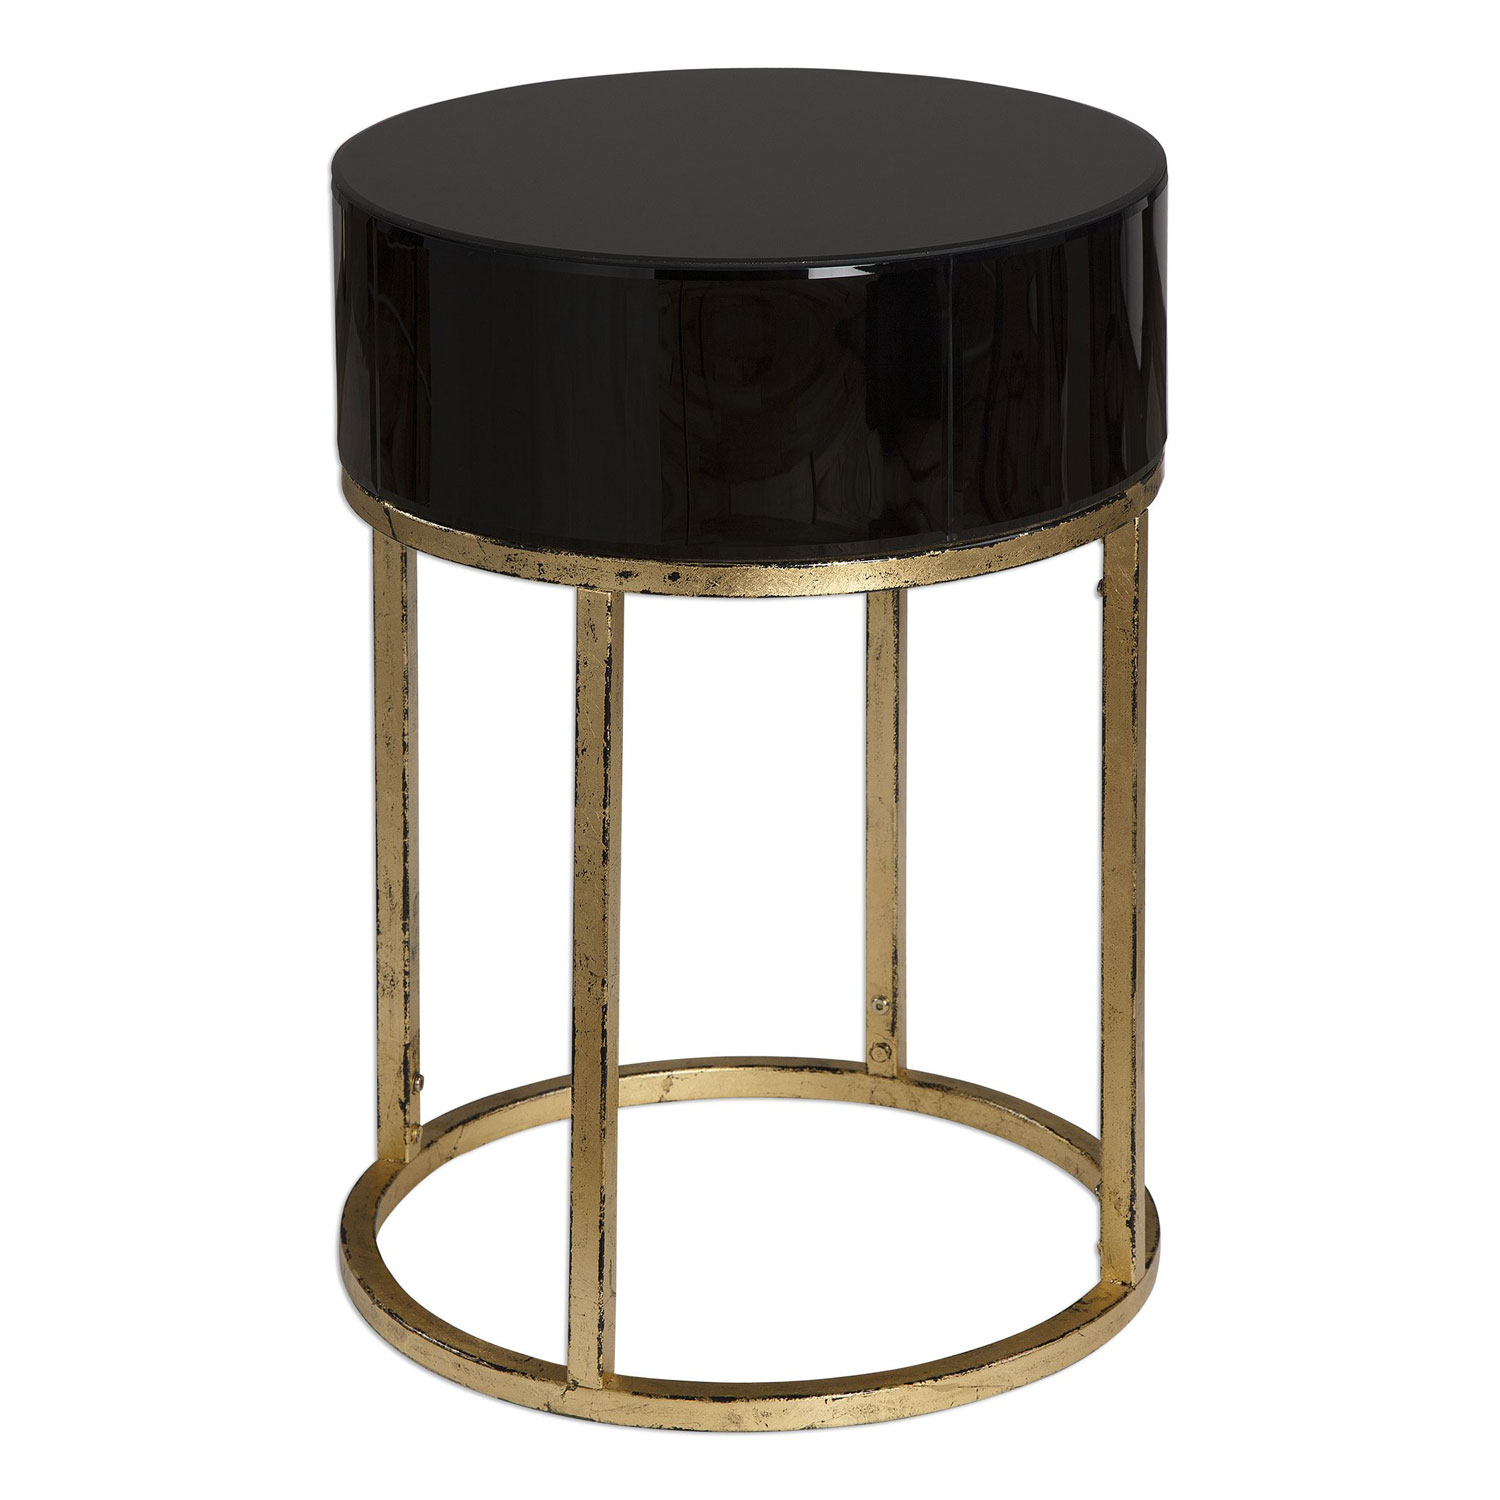 uttermost myles antique gold and black accent table bellacor hover zoom acrylic drink beautiful round tablecloths cherry end tables french marble bistro indoor outdoor tablecloth